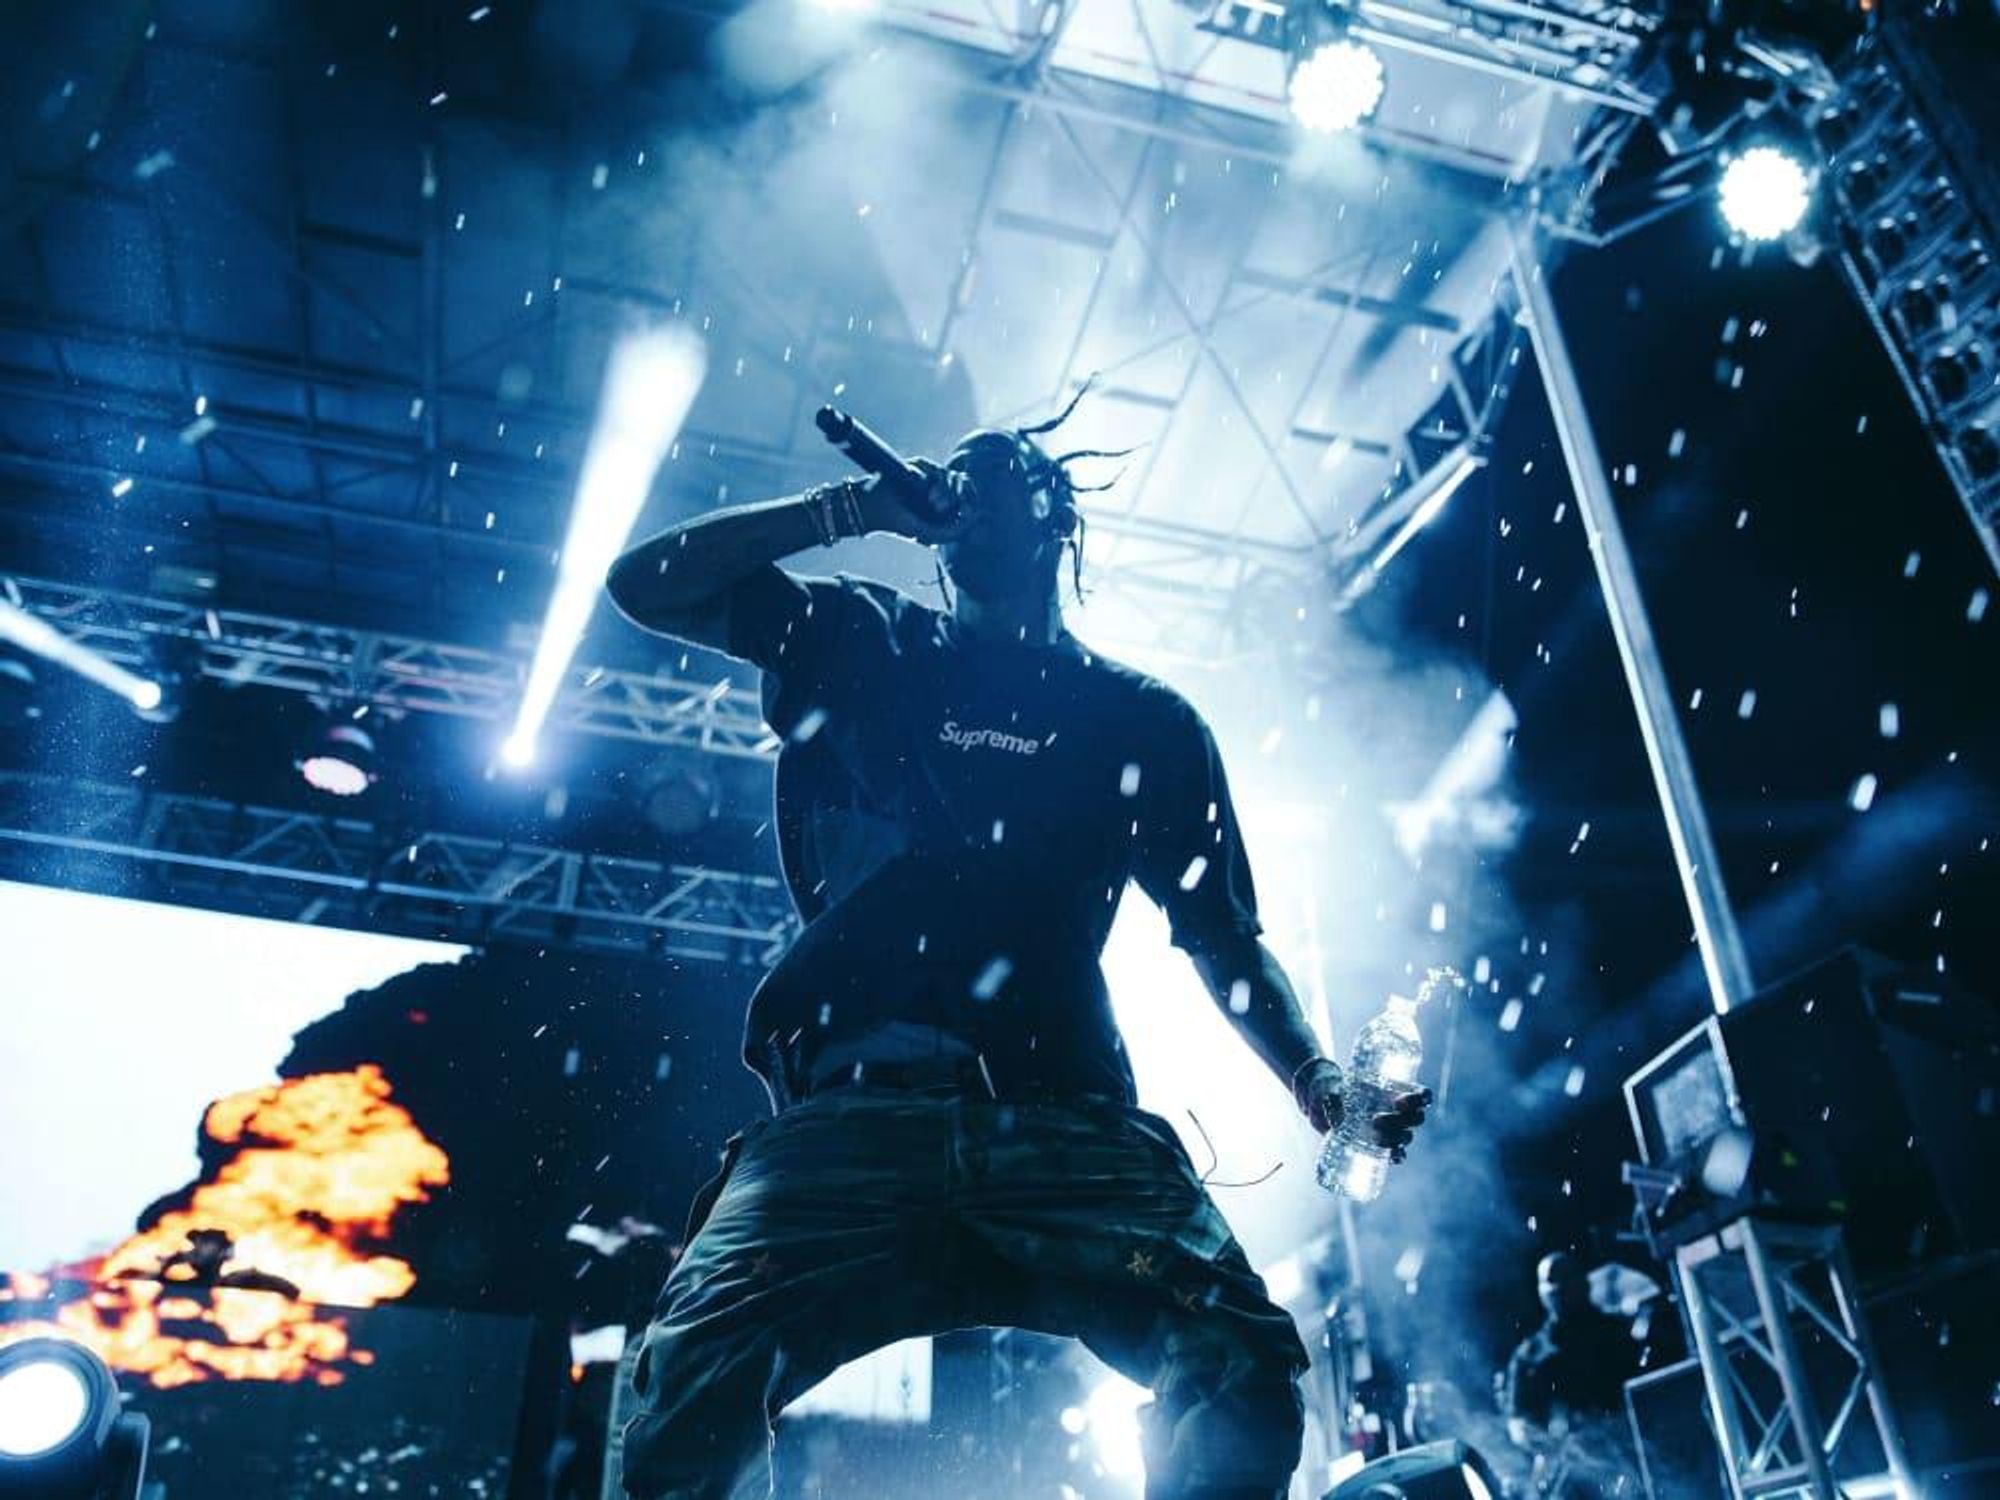 Travis Scott Proves His Festival's Staying Power at the Second Annual  Astroworld – Texas Monthly